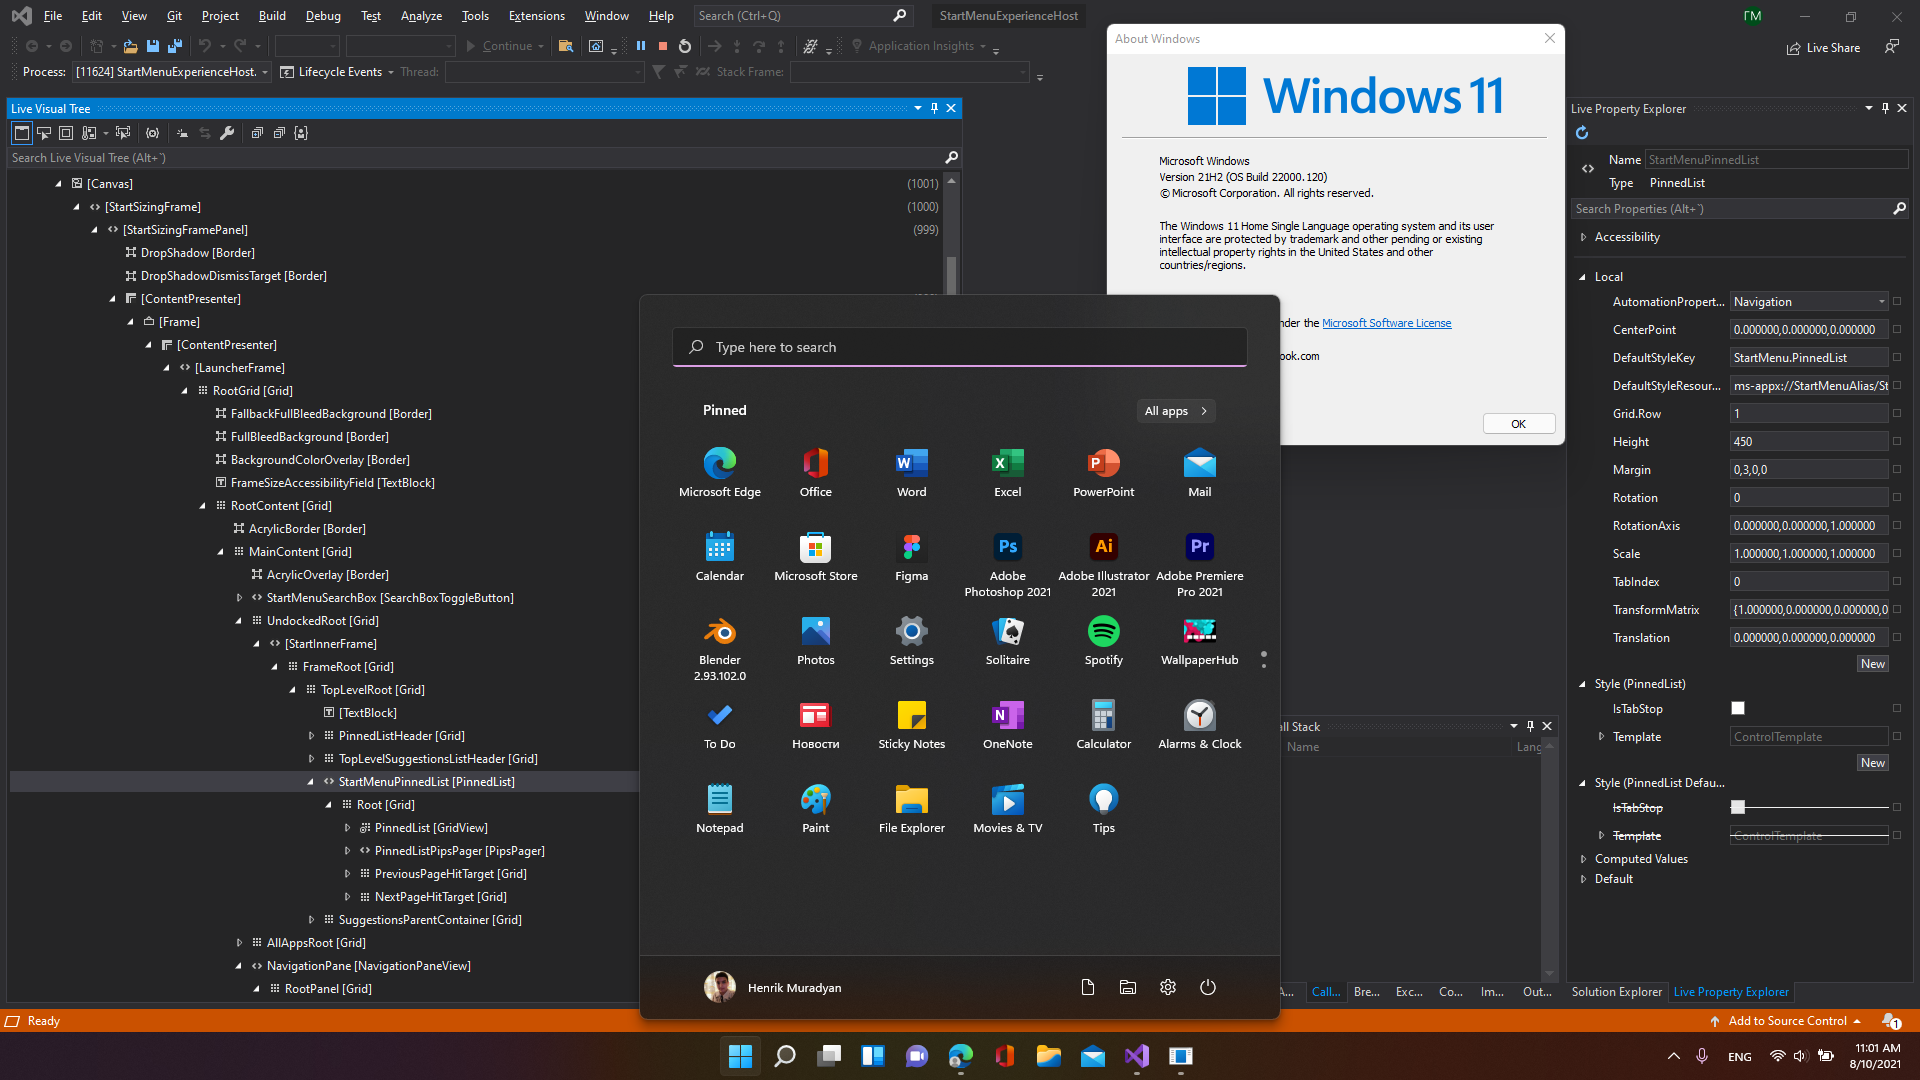  A screenshot of the Windows 11 Start Menu with ads showing the user experience.